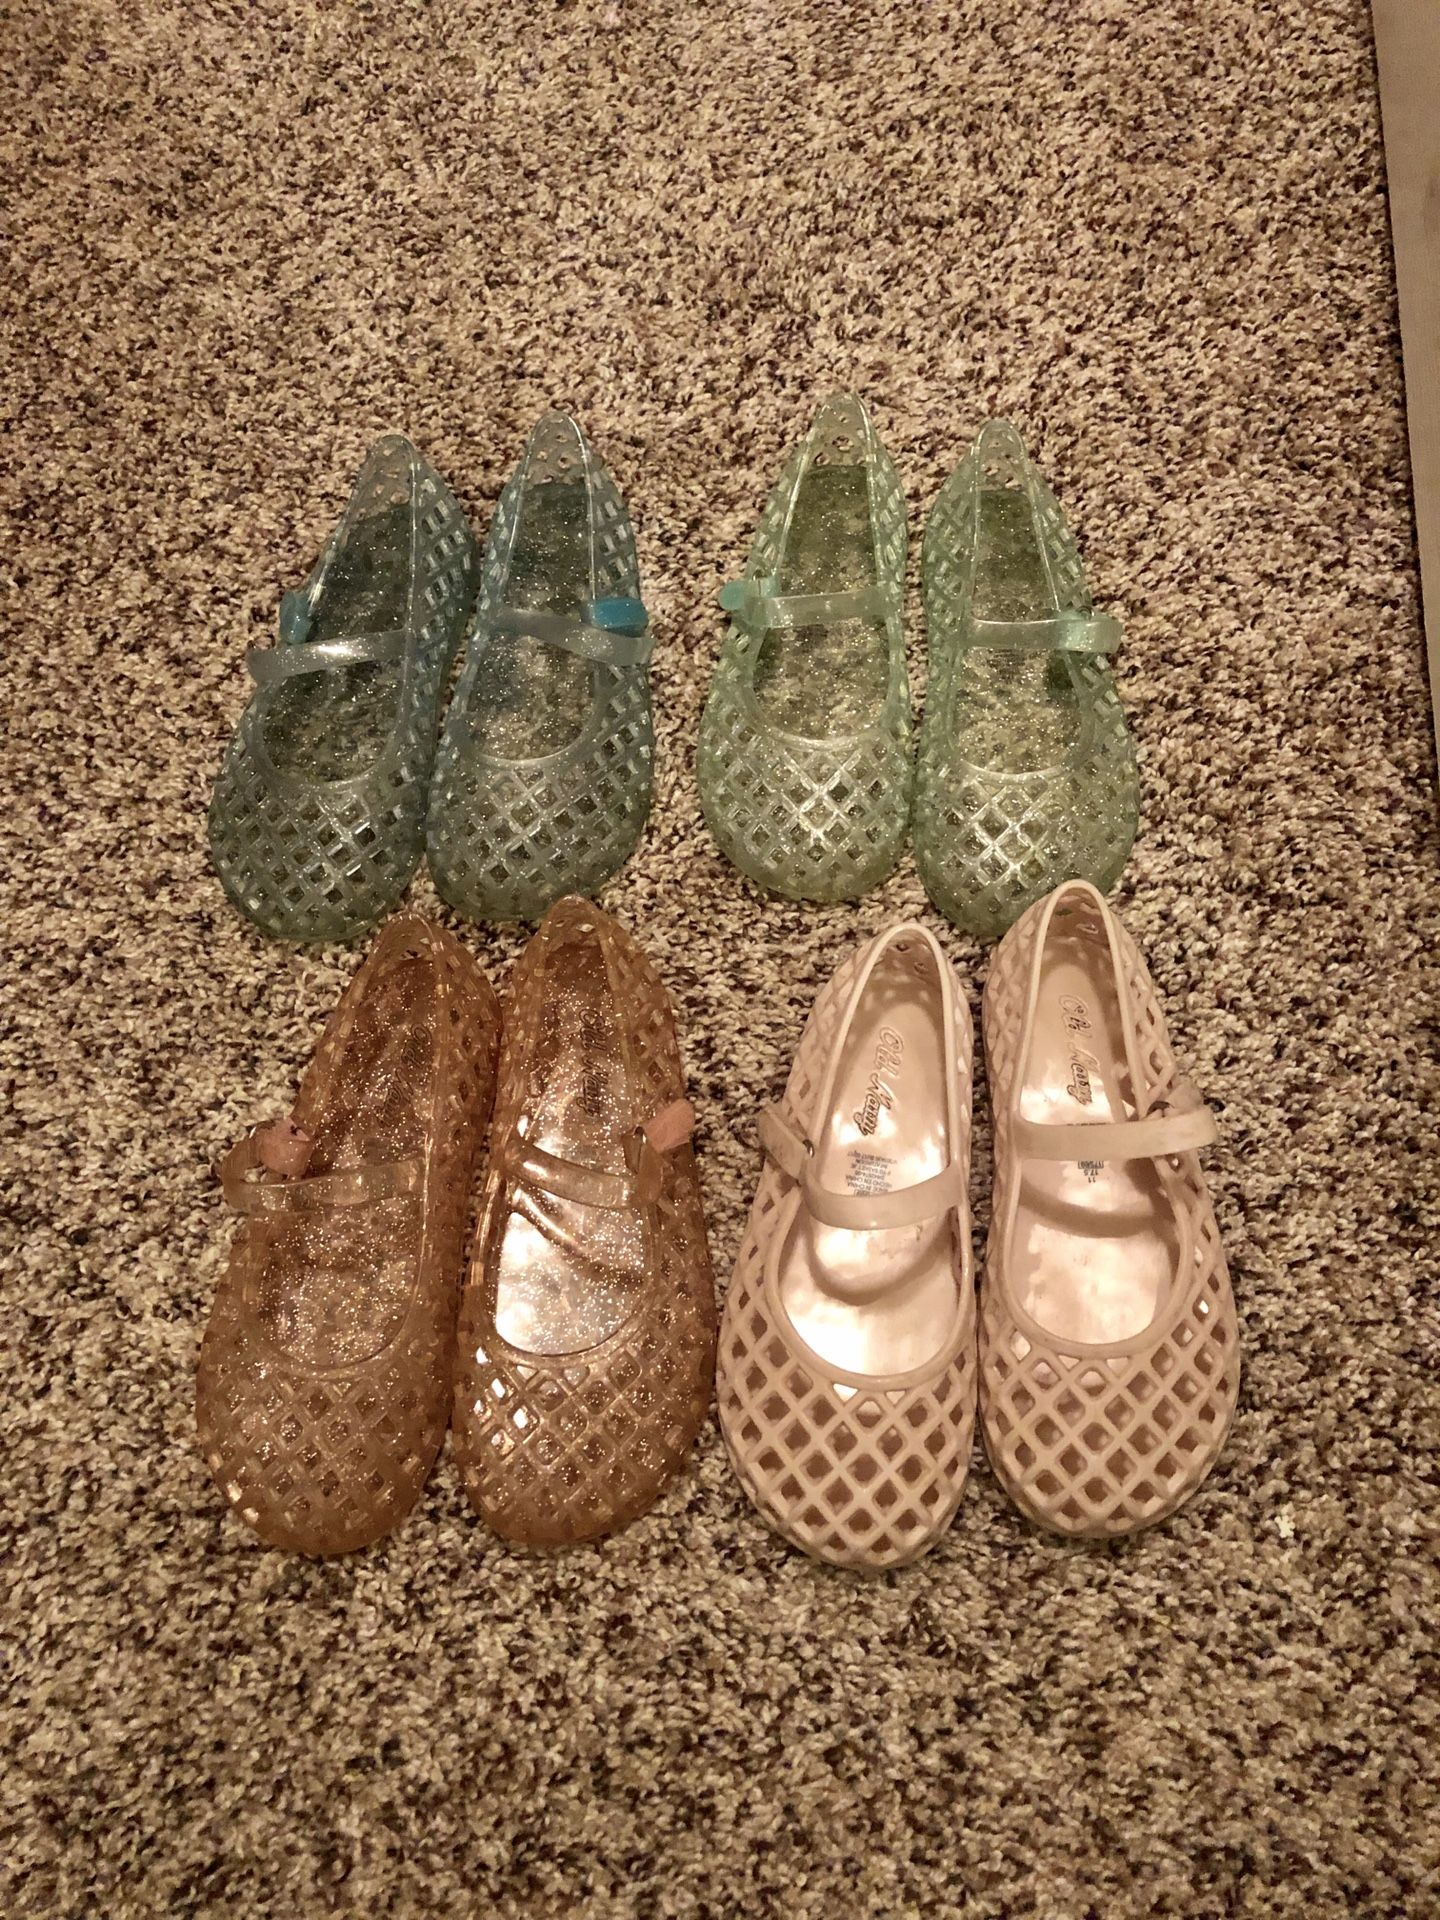 Girls size 11 toddler shoes